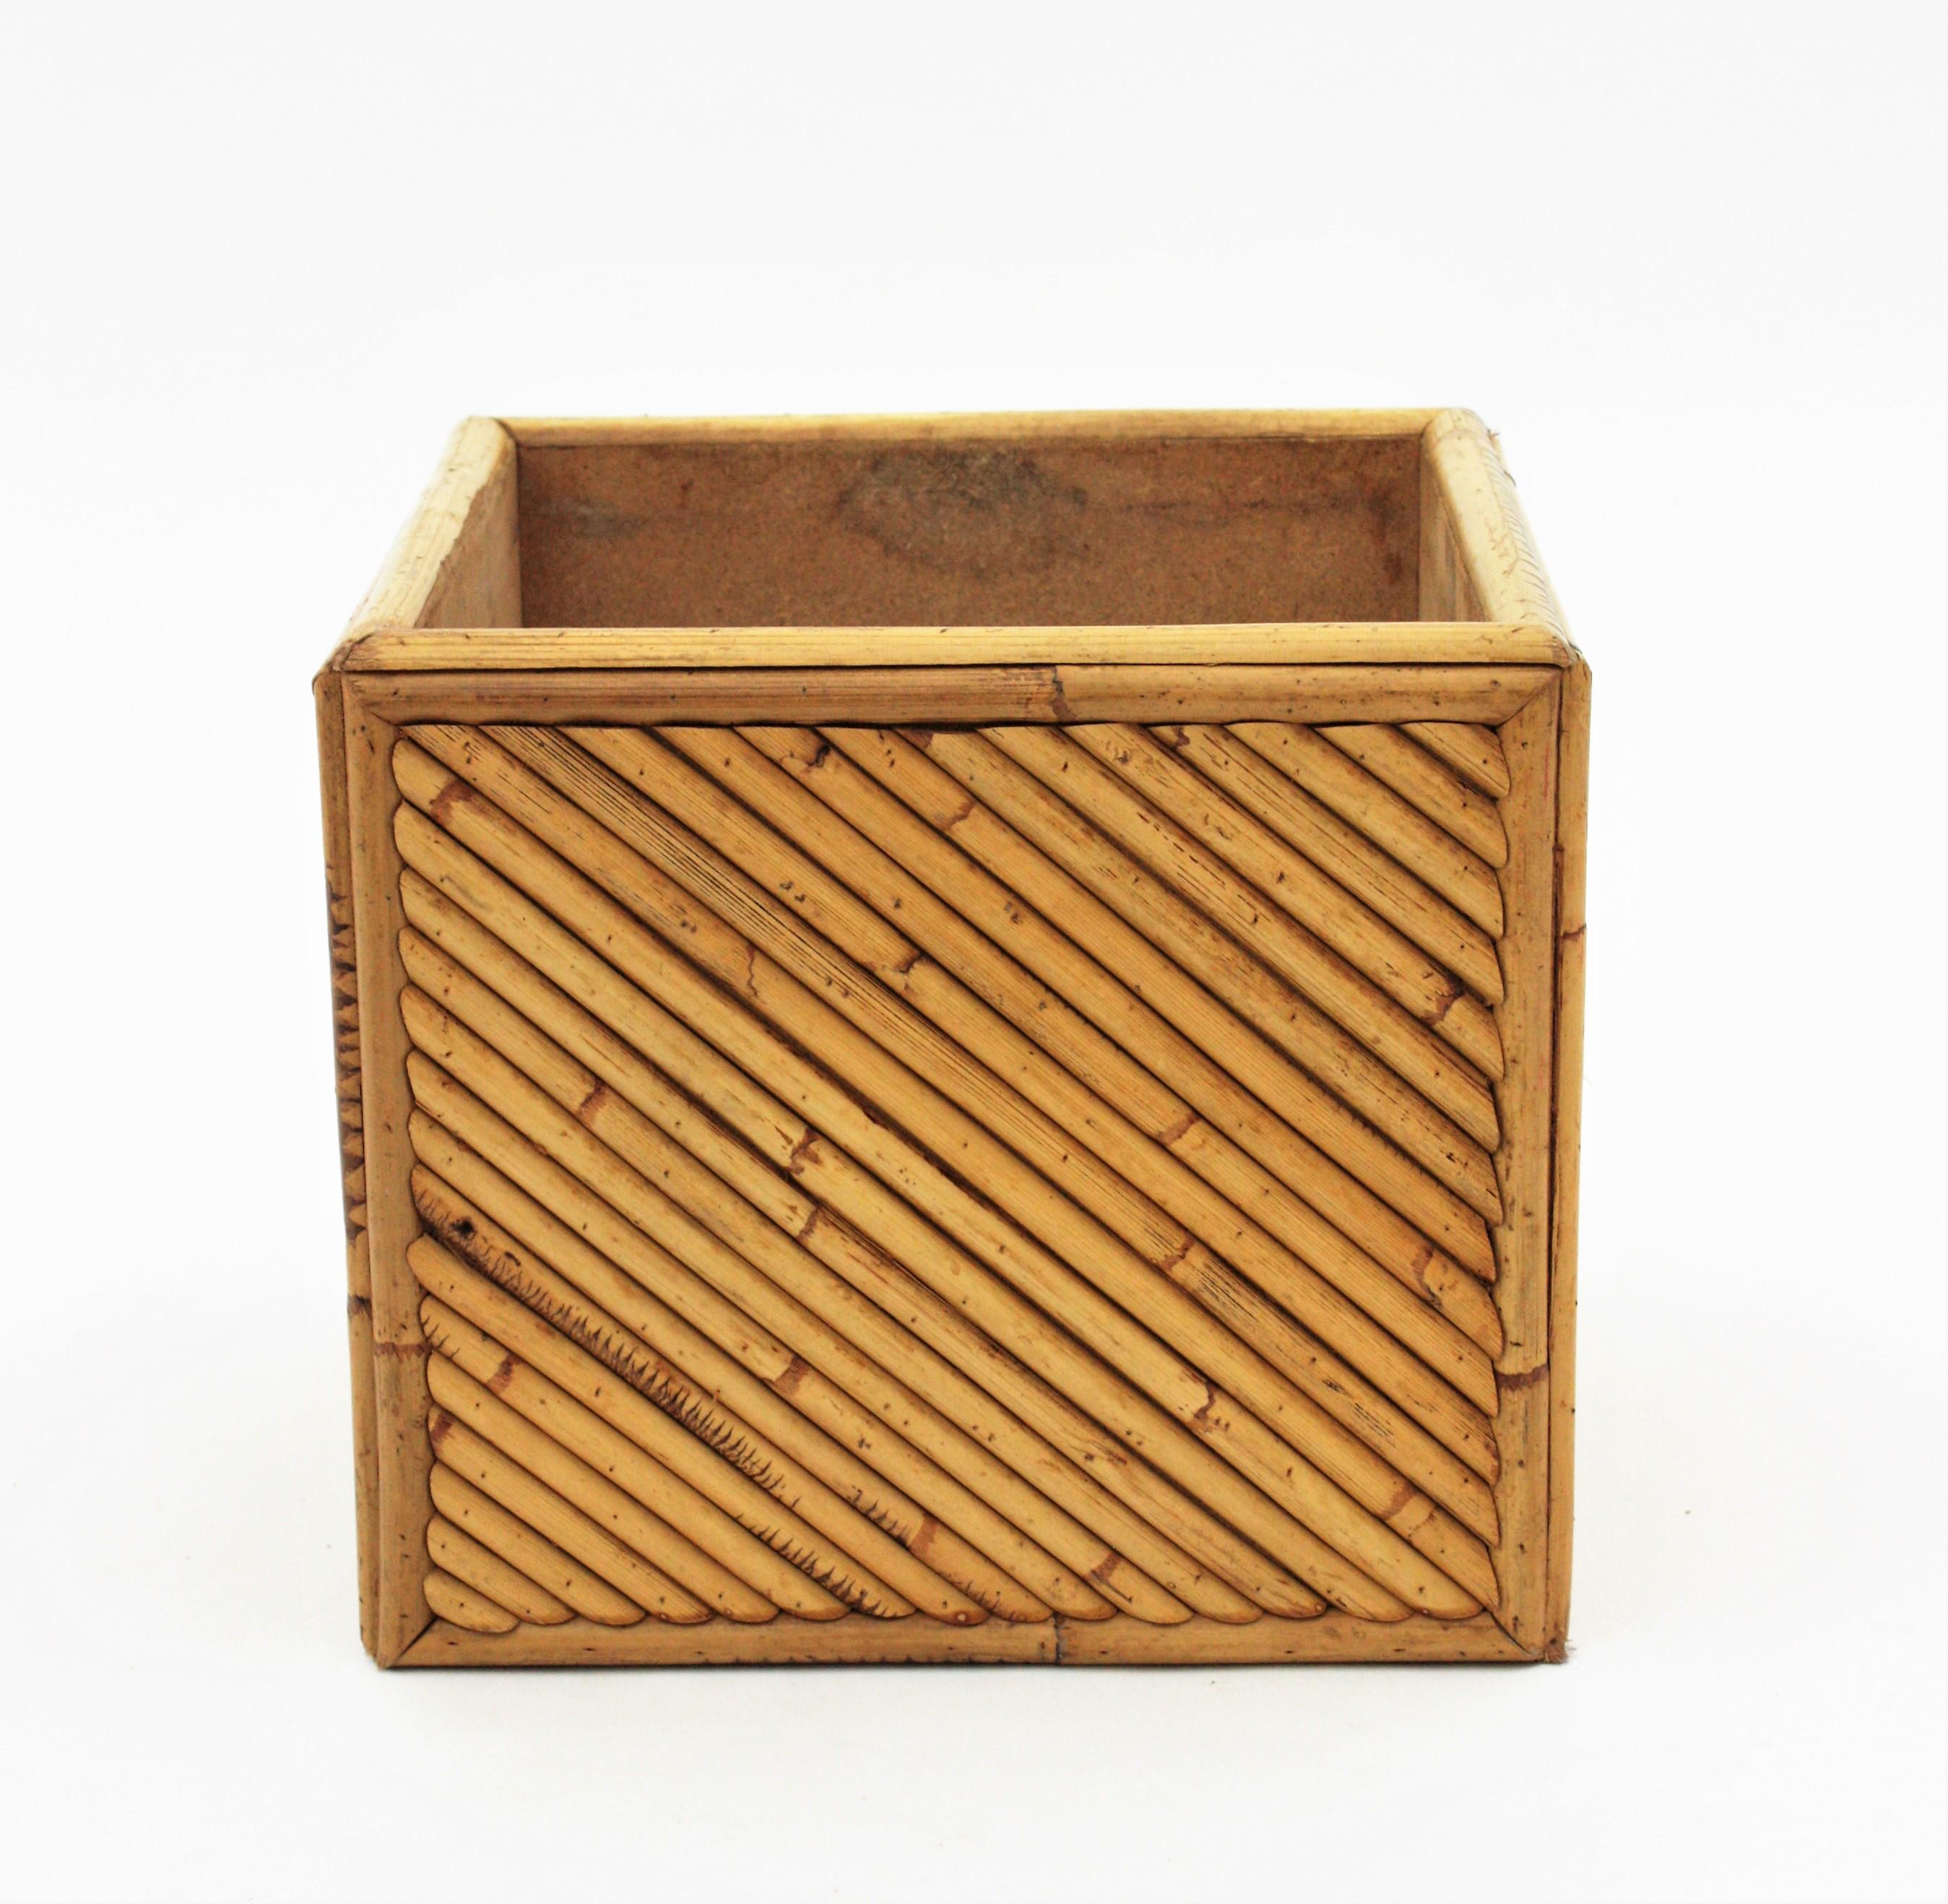 Hand-Crafted Split Reed Rattan Bamboo Gabriella Crespi Style Planter, 1970s For Sale